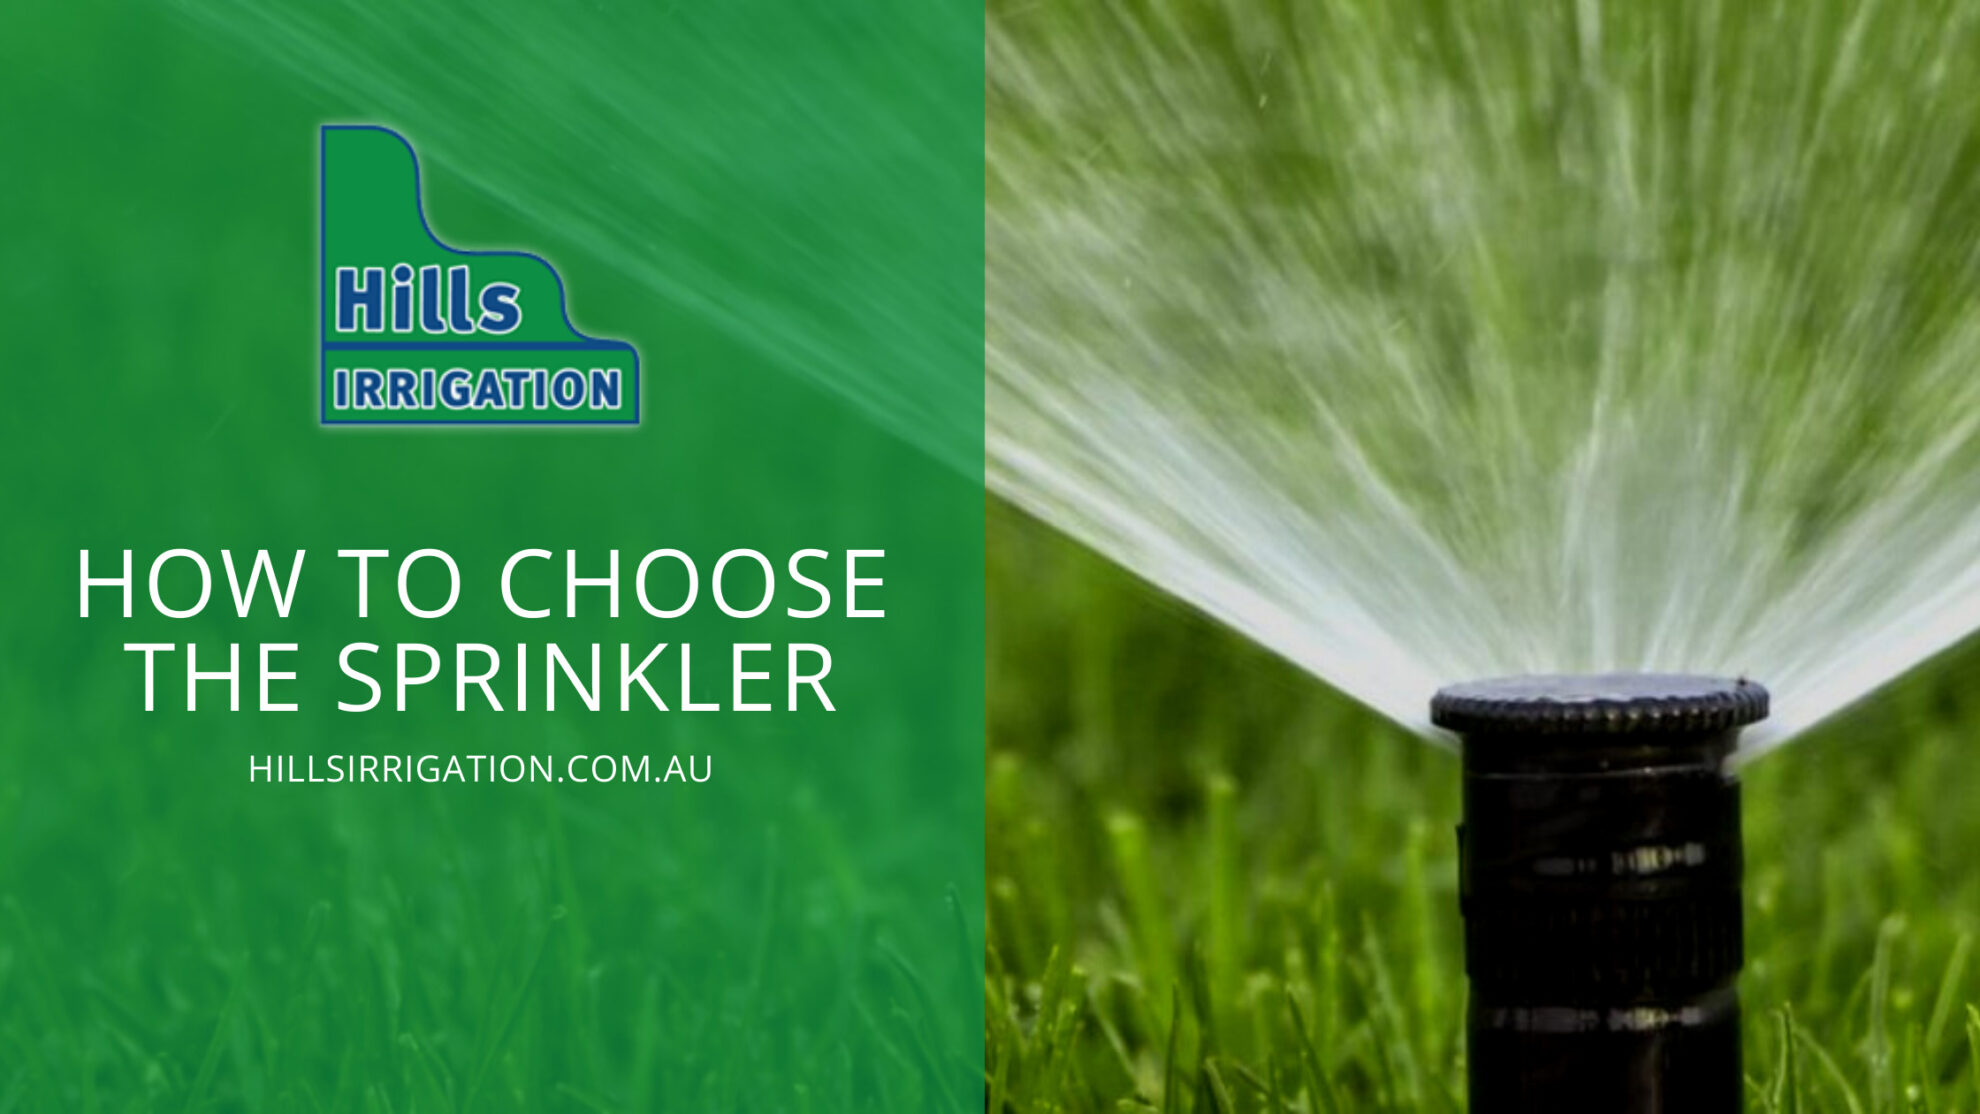 How to Choose & Use Lawn Sprinklers - Hill Irrigation